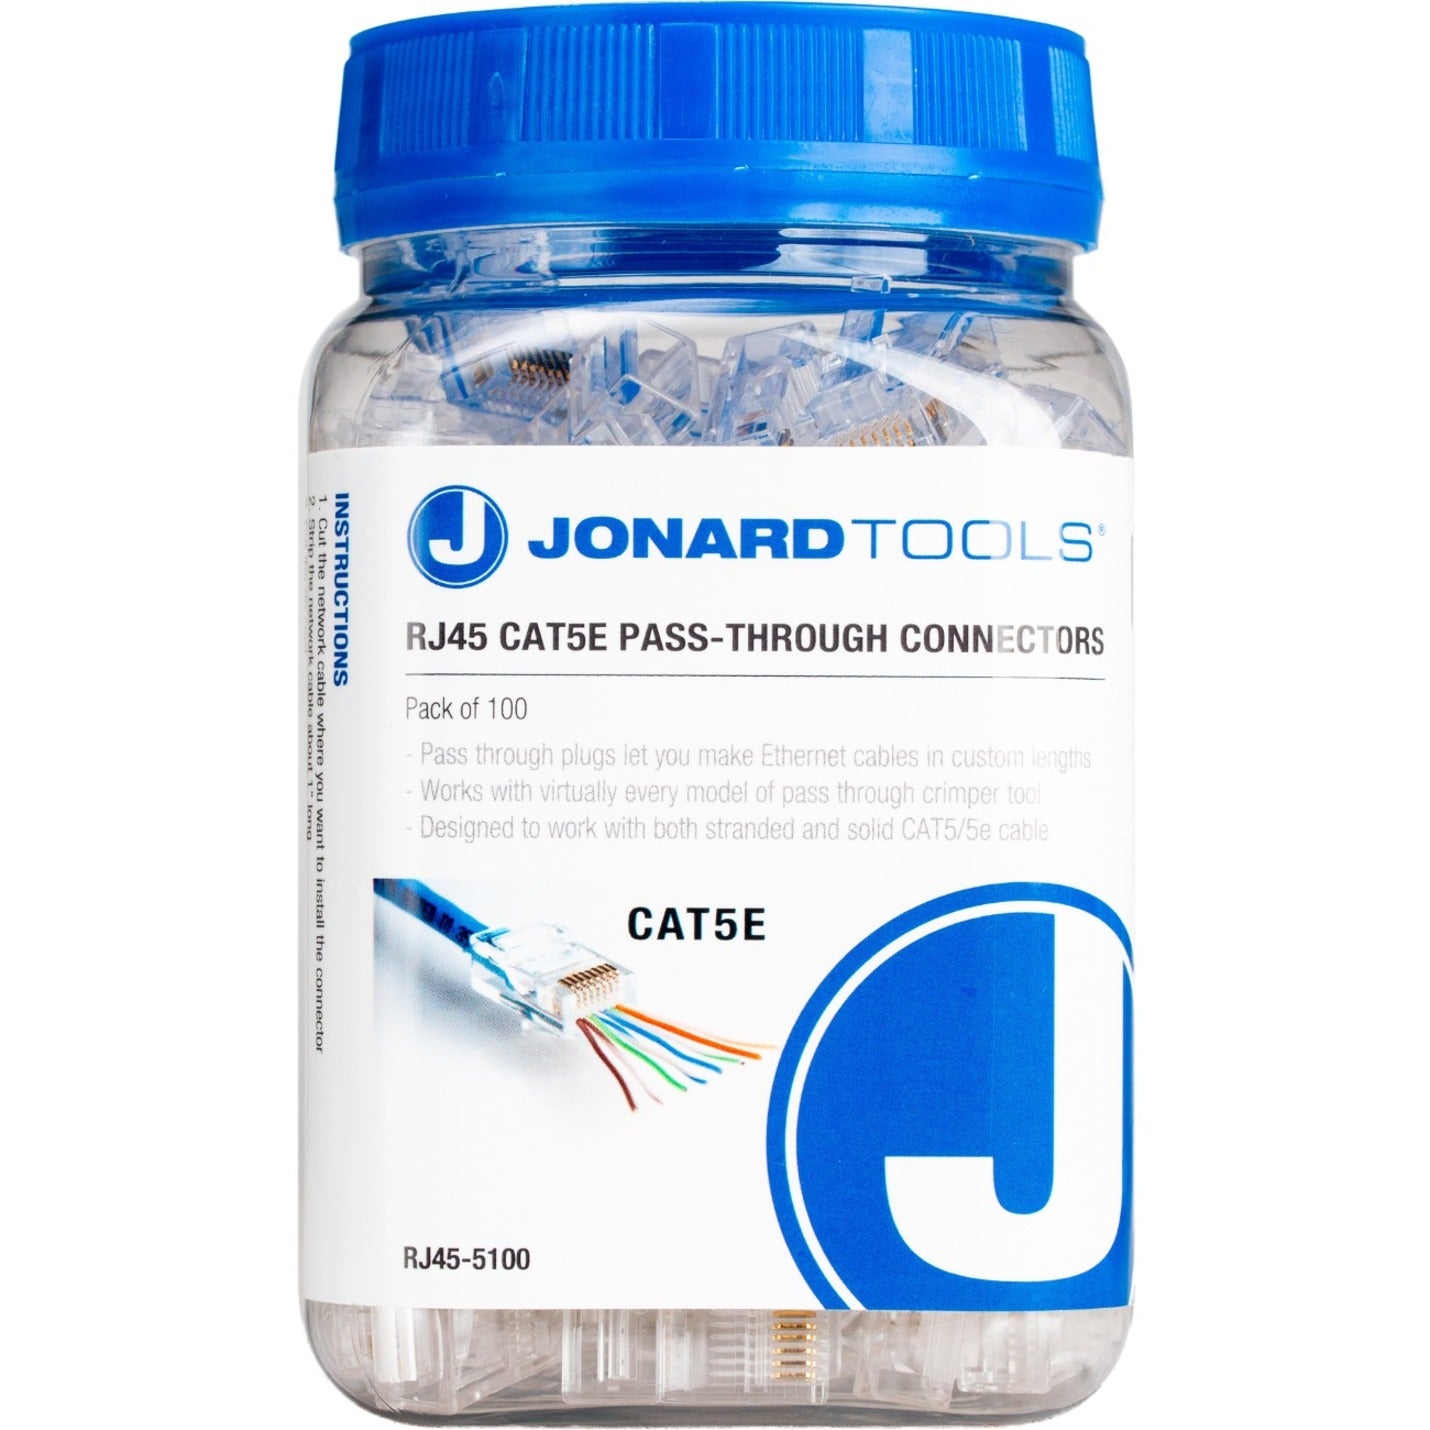 Jonard Tools RJ45-5100 RJ45 CAT5e Pass-Through Connectors (Pack of 100), Gold Plated Network Connector